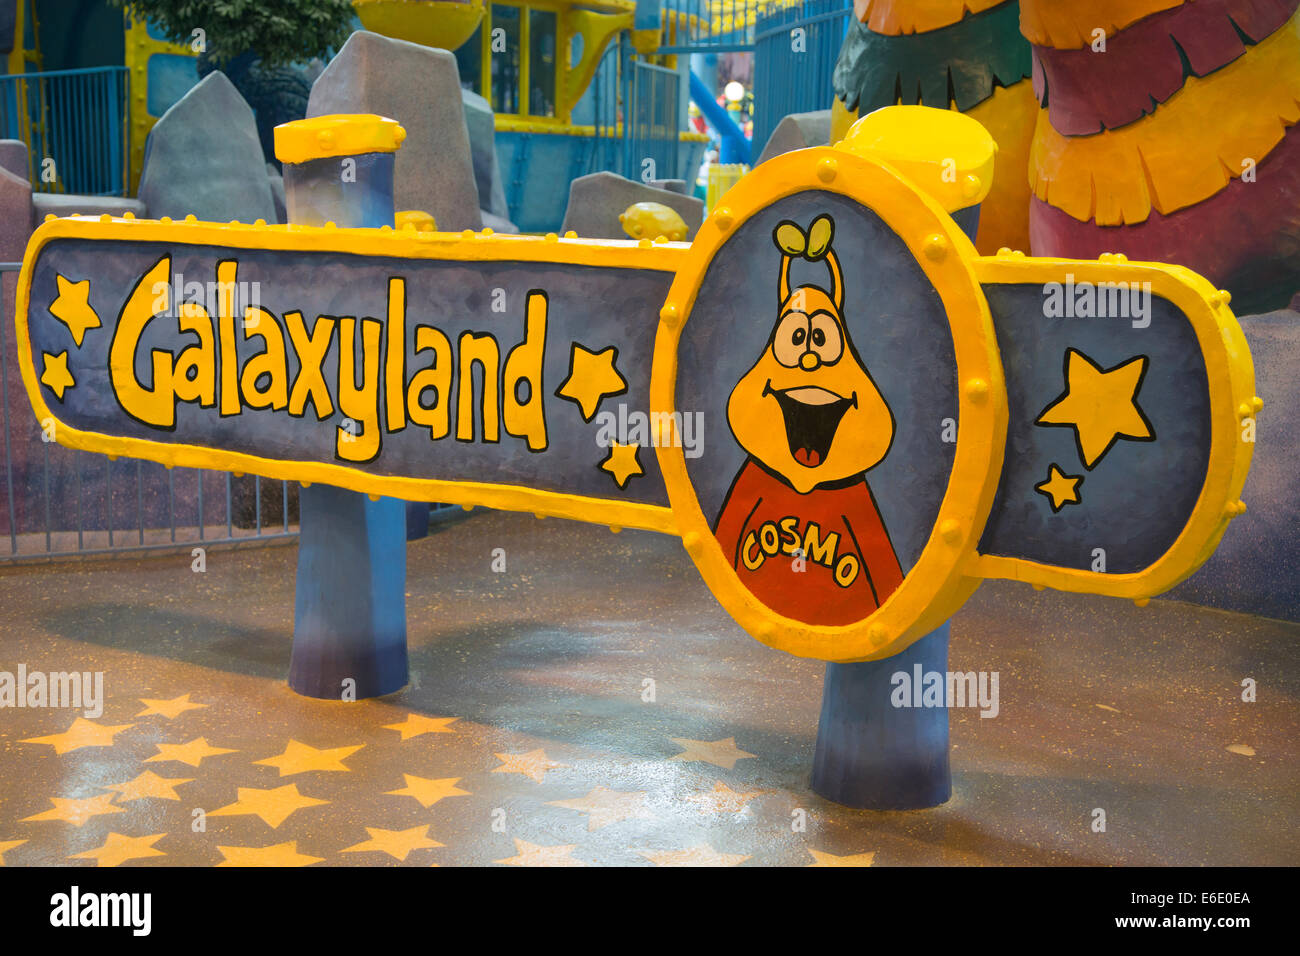 Galaxyland, one of the world's largest indoor amusement parks in West Edmonton mall Stock Photo